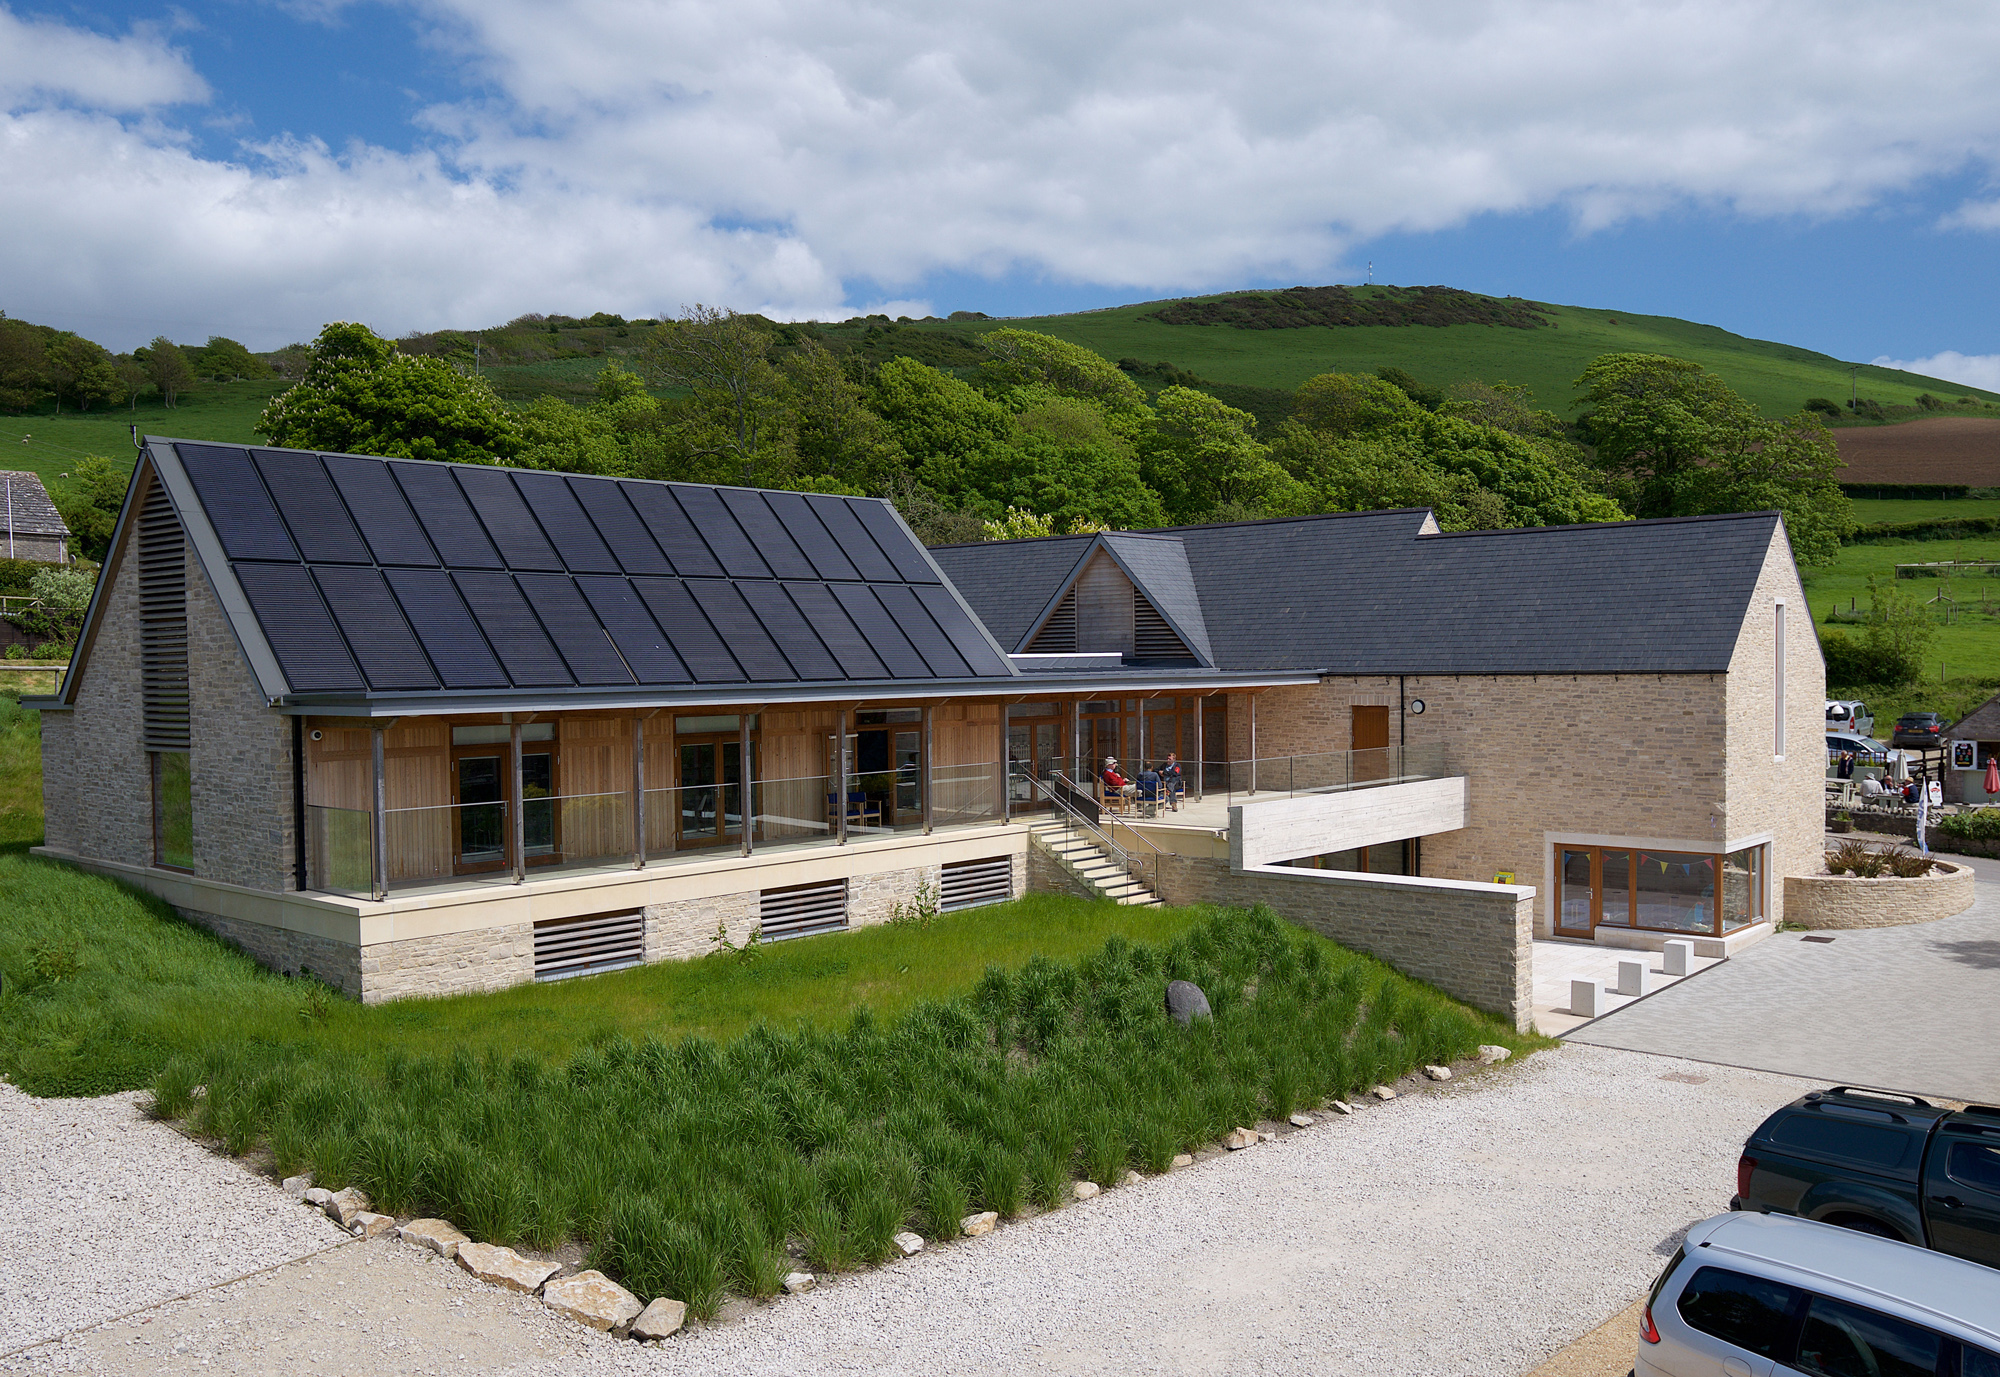 Cembrit Gendyne natural slate gives museum a Devonian roof